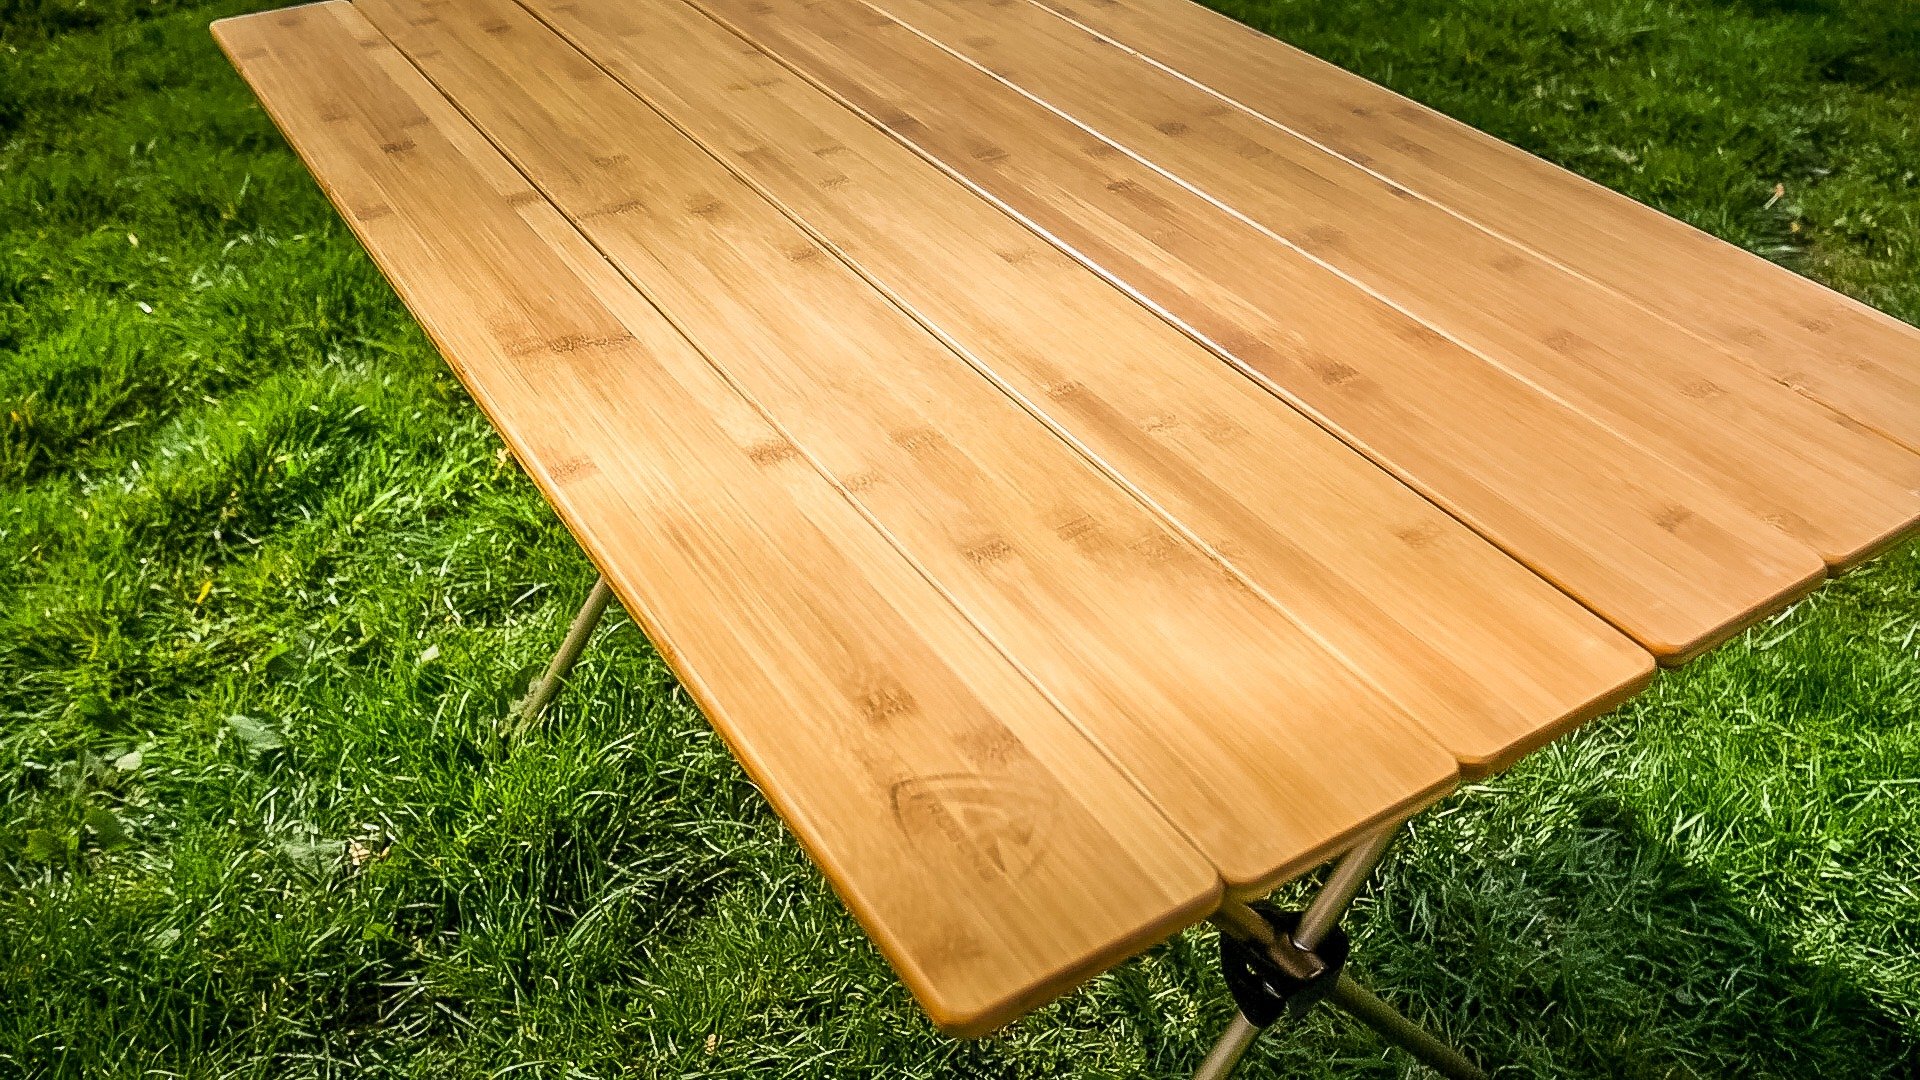 Bamboo tabletop